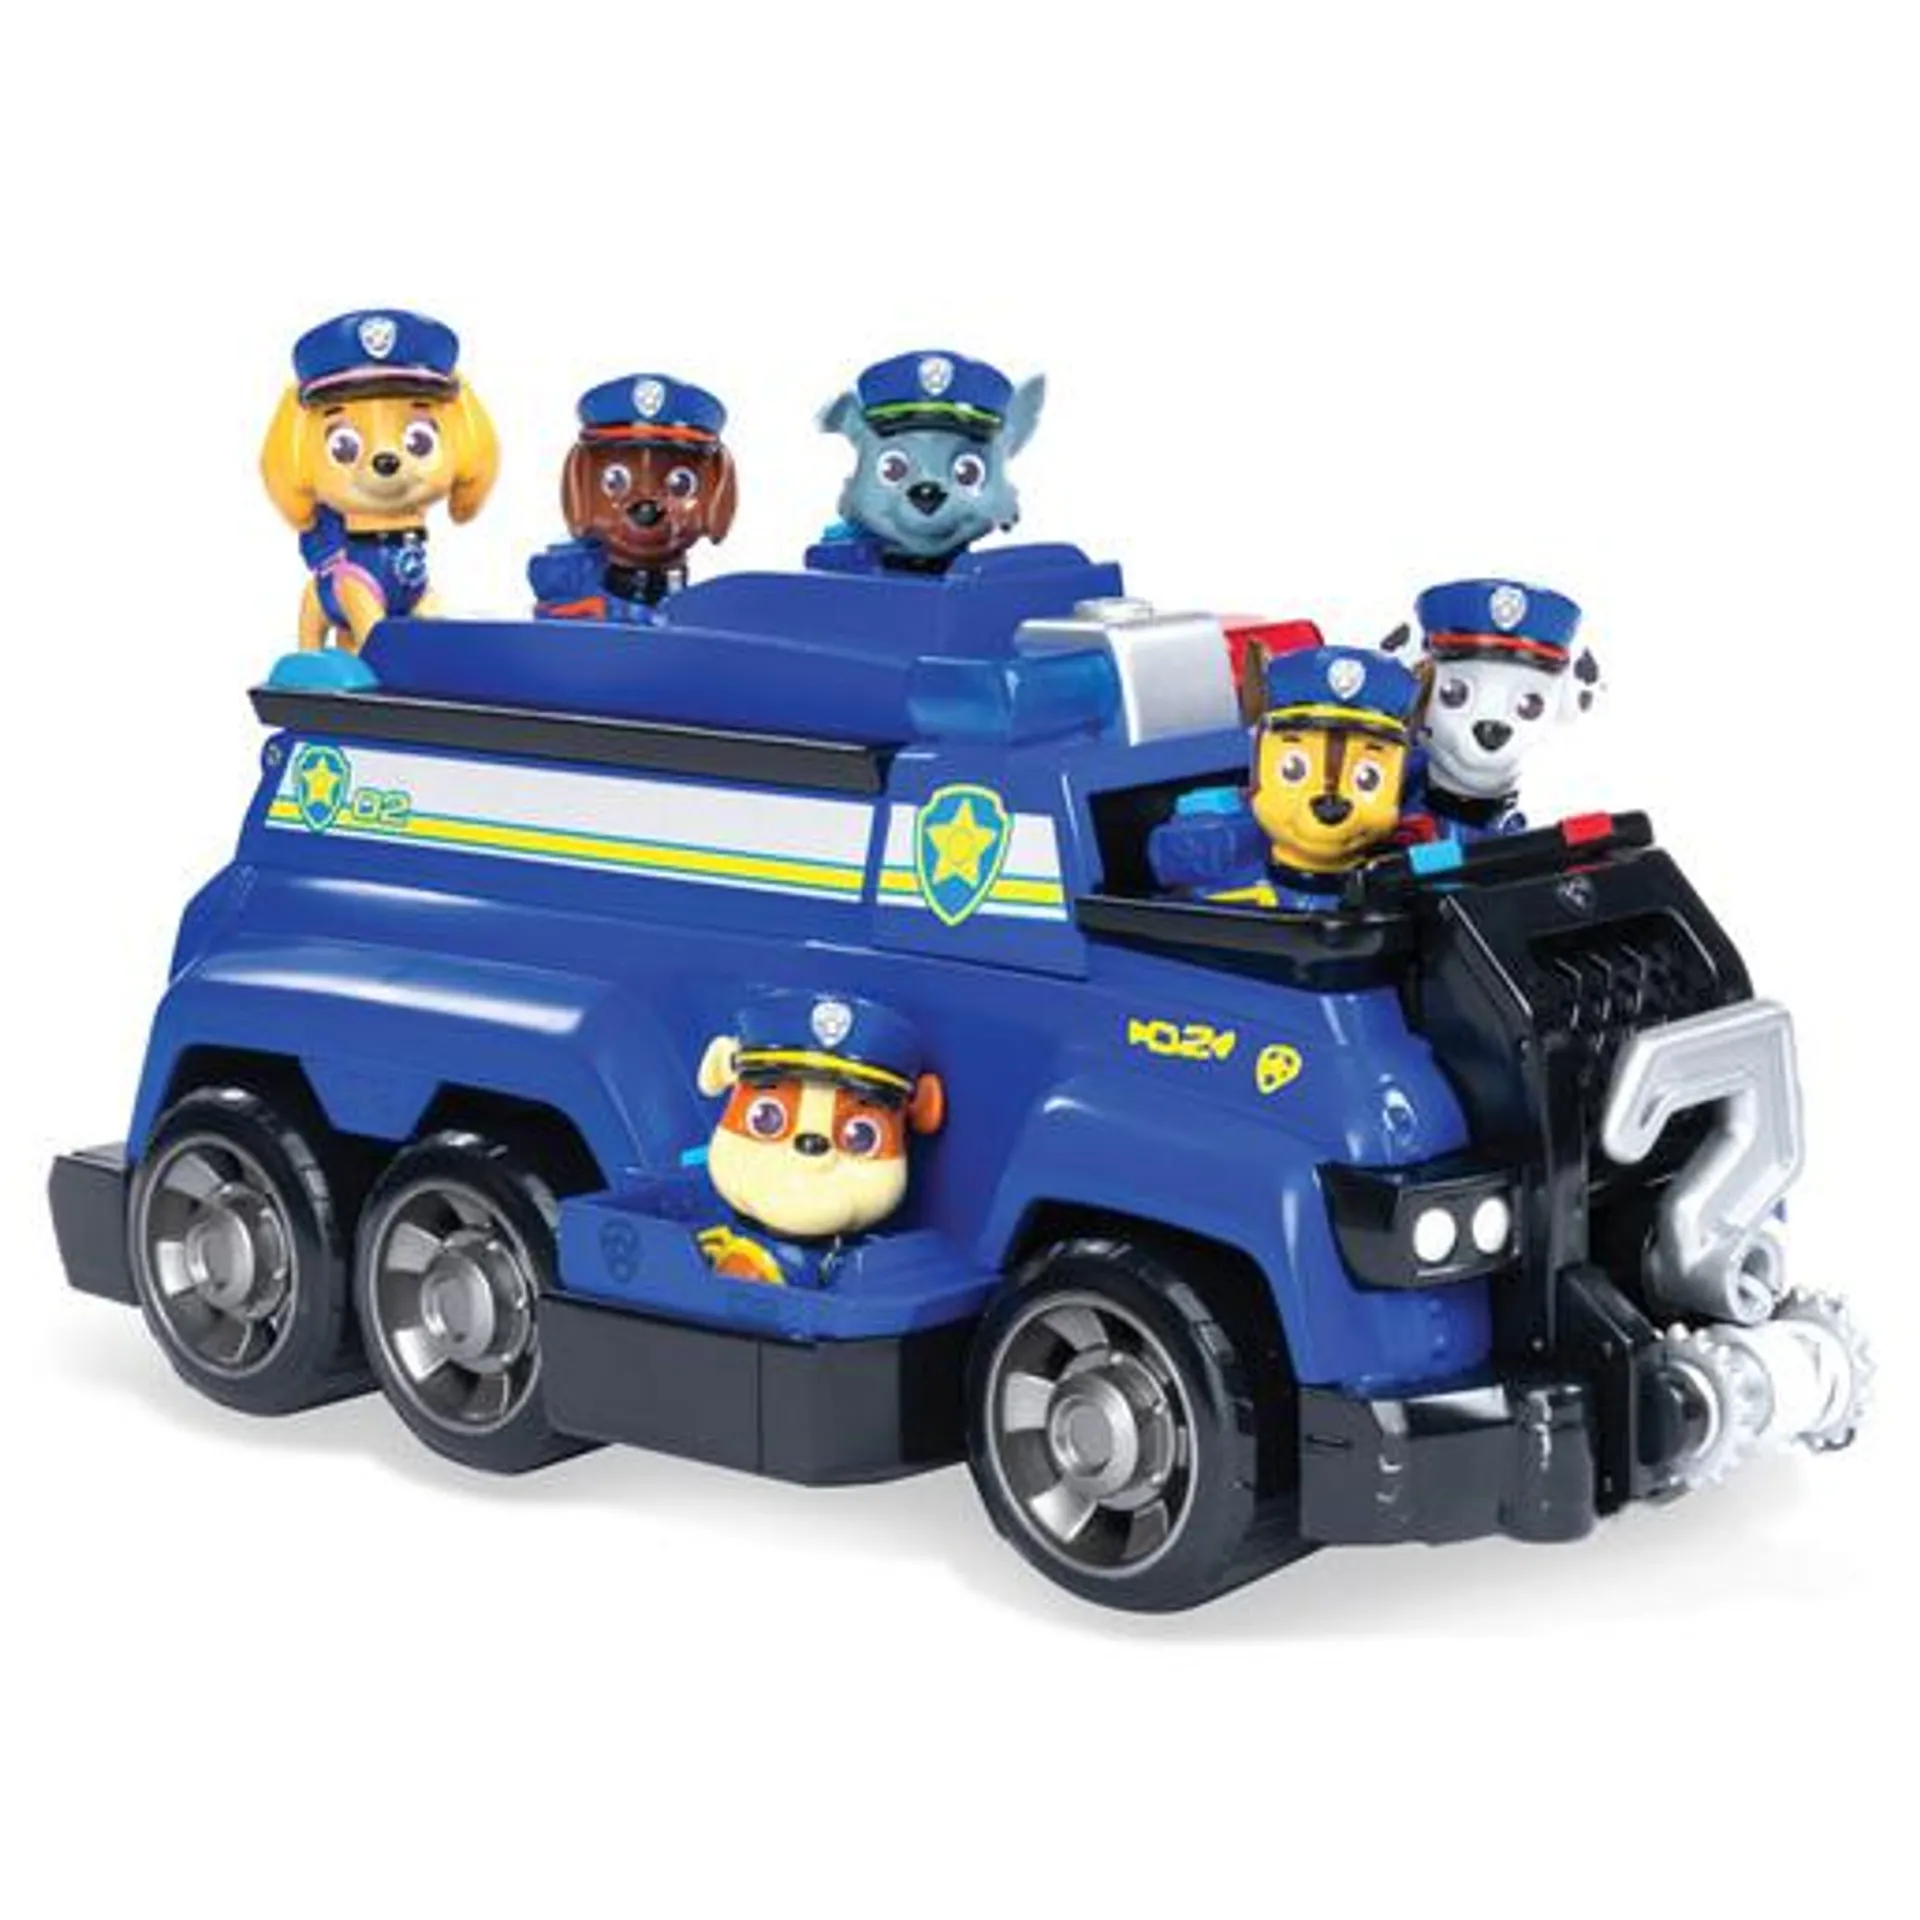 Paw Patrol Total Team Rescues: Chase's Team Police Cruiser Vehicle with 6 Pup Figures